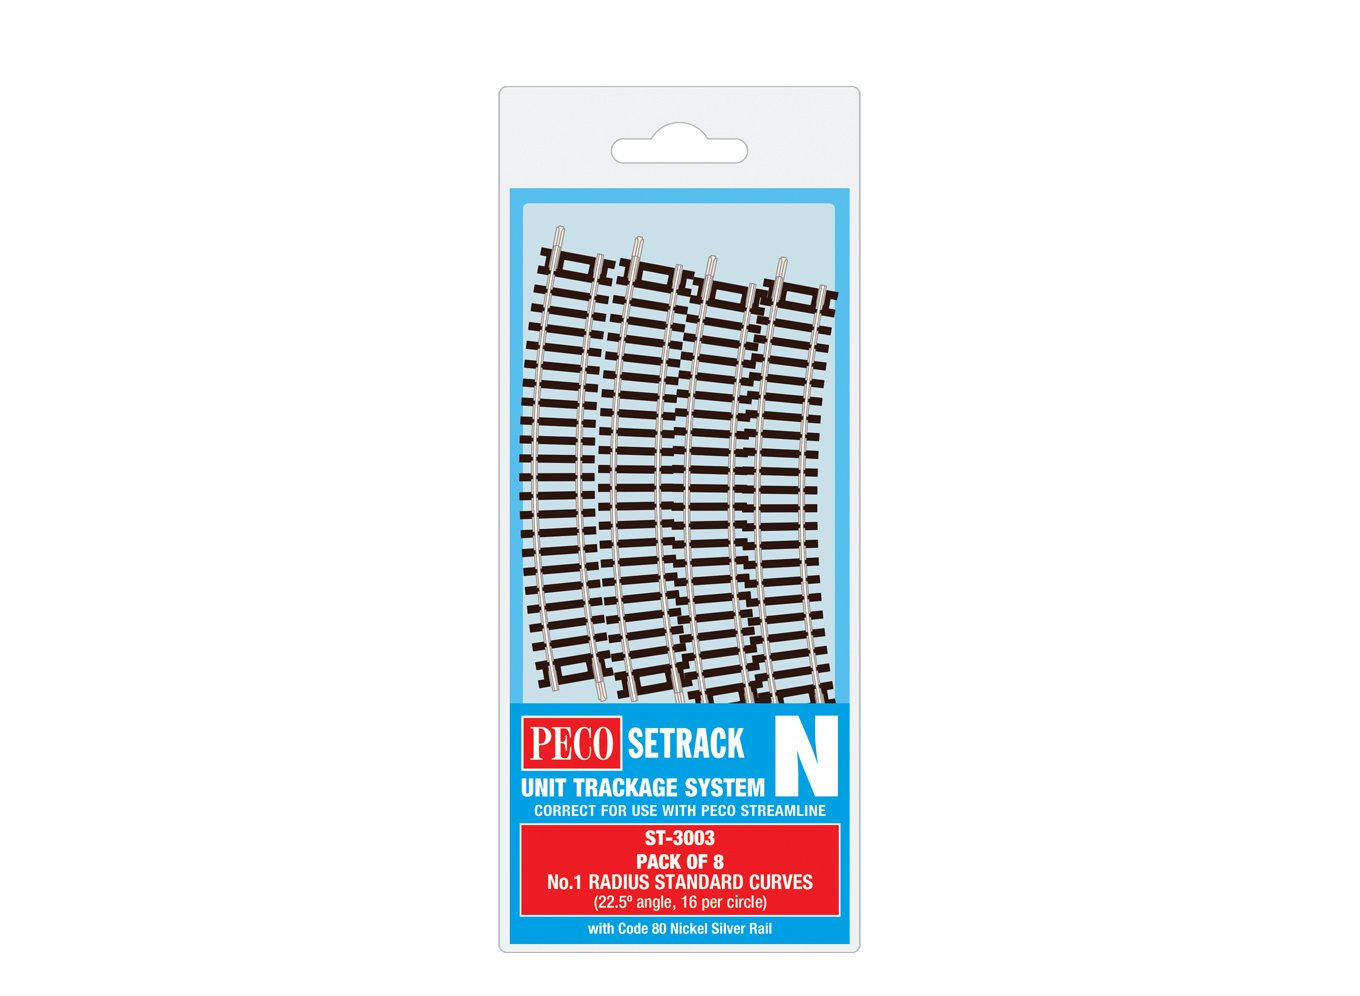 Peco ST-3003 N Code 80 1st Radius Standard Curved Track (Pack of 8)